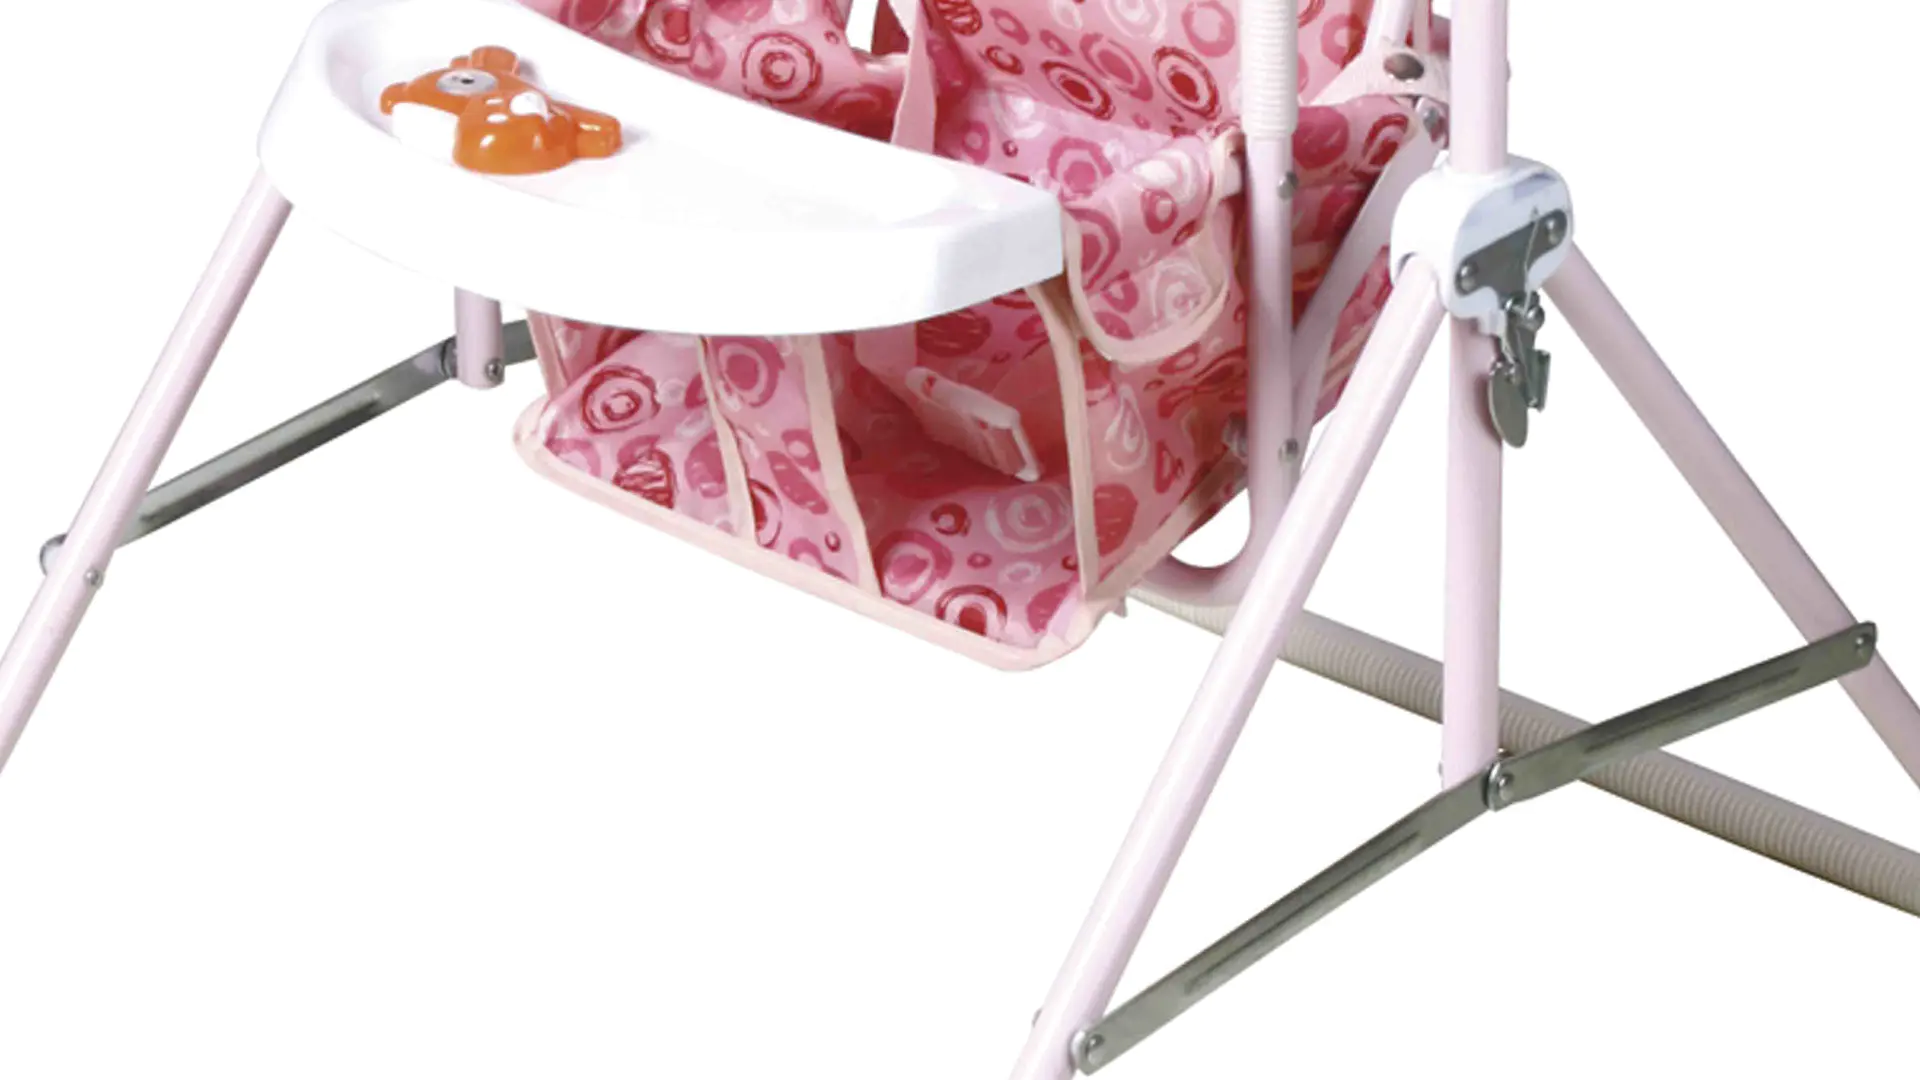 Aoqi quality baby swing price factory for kids